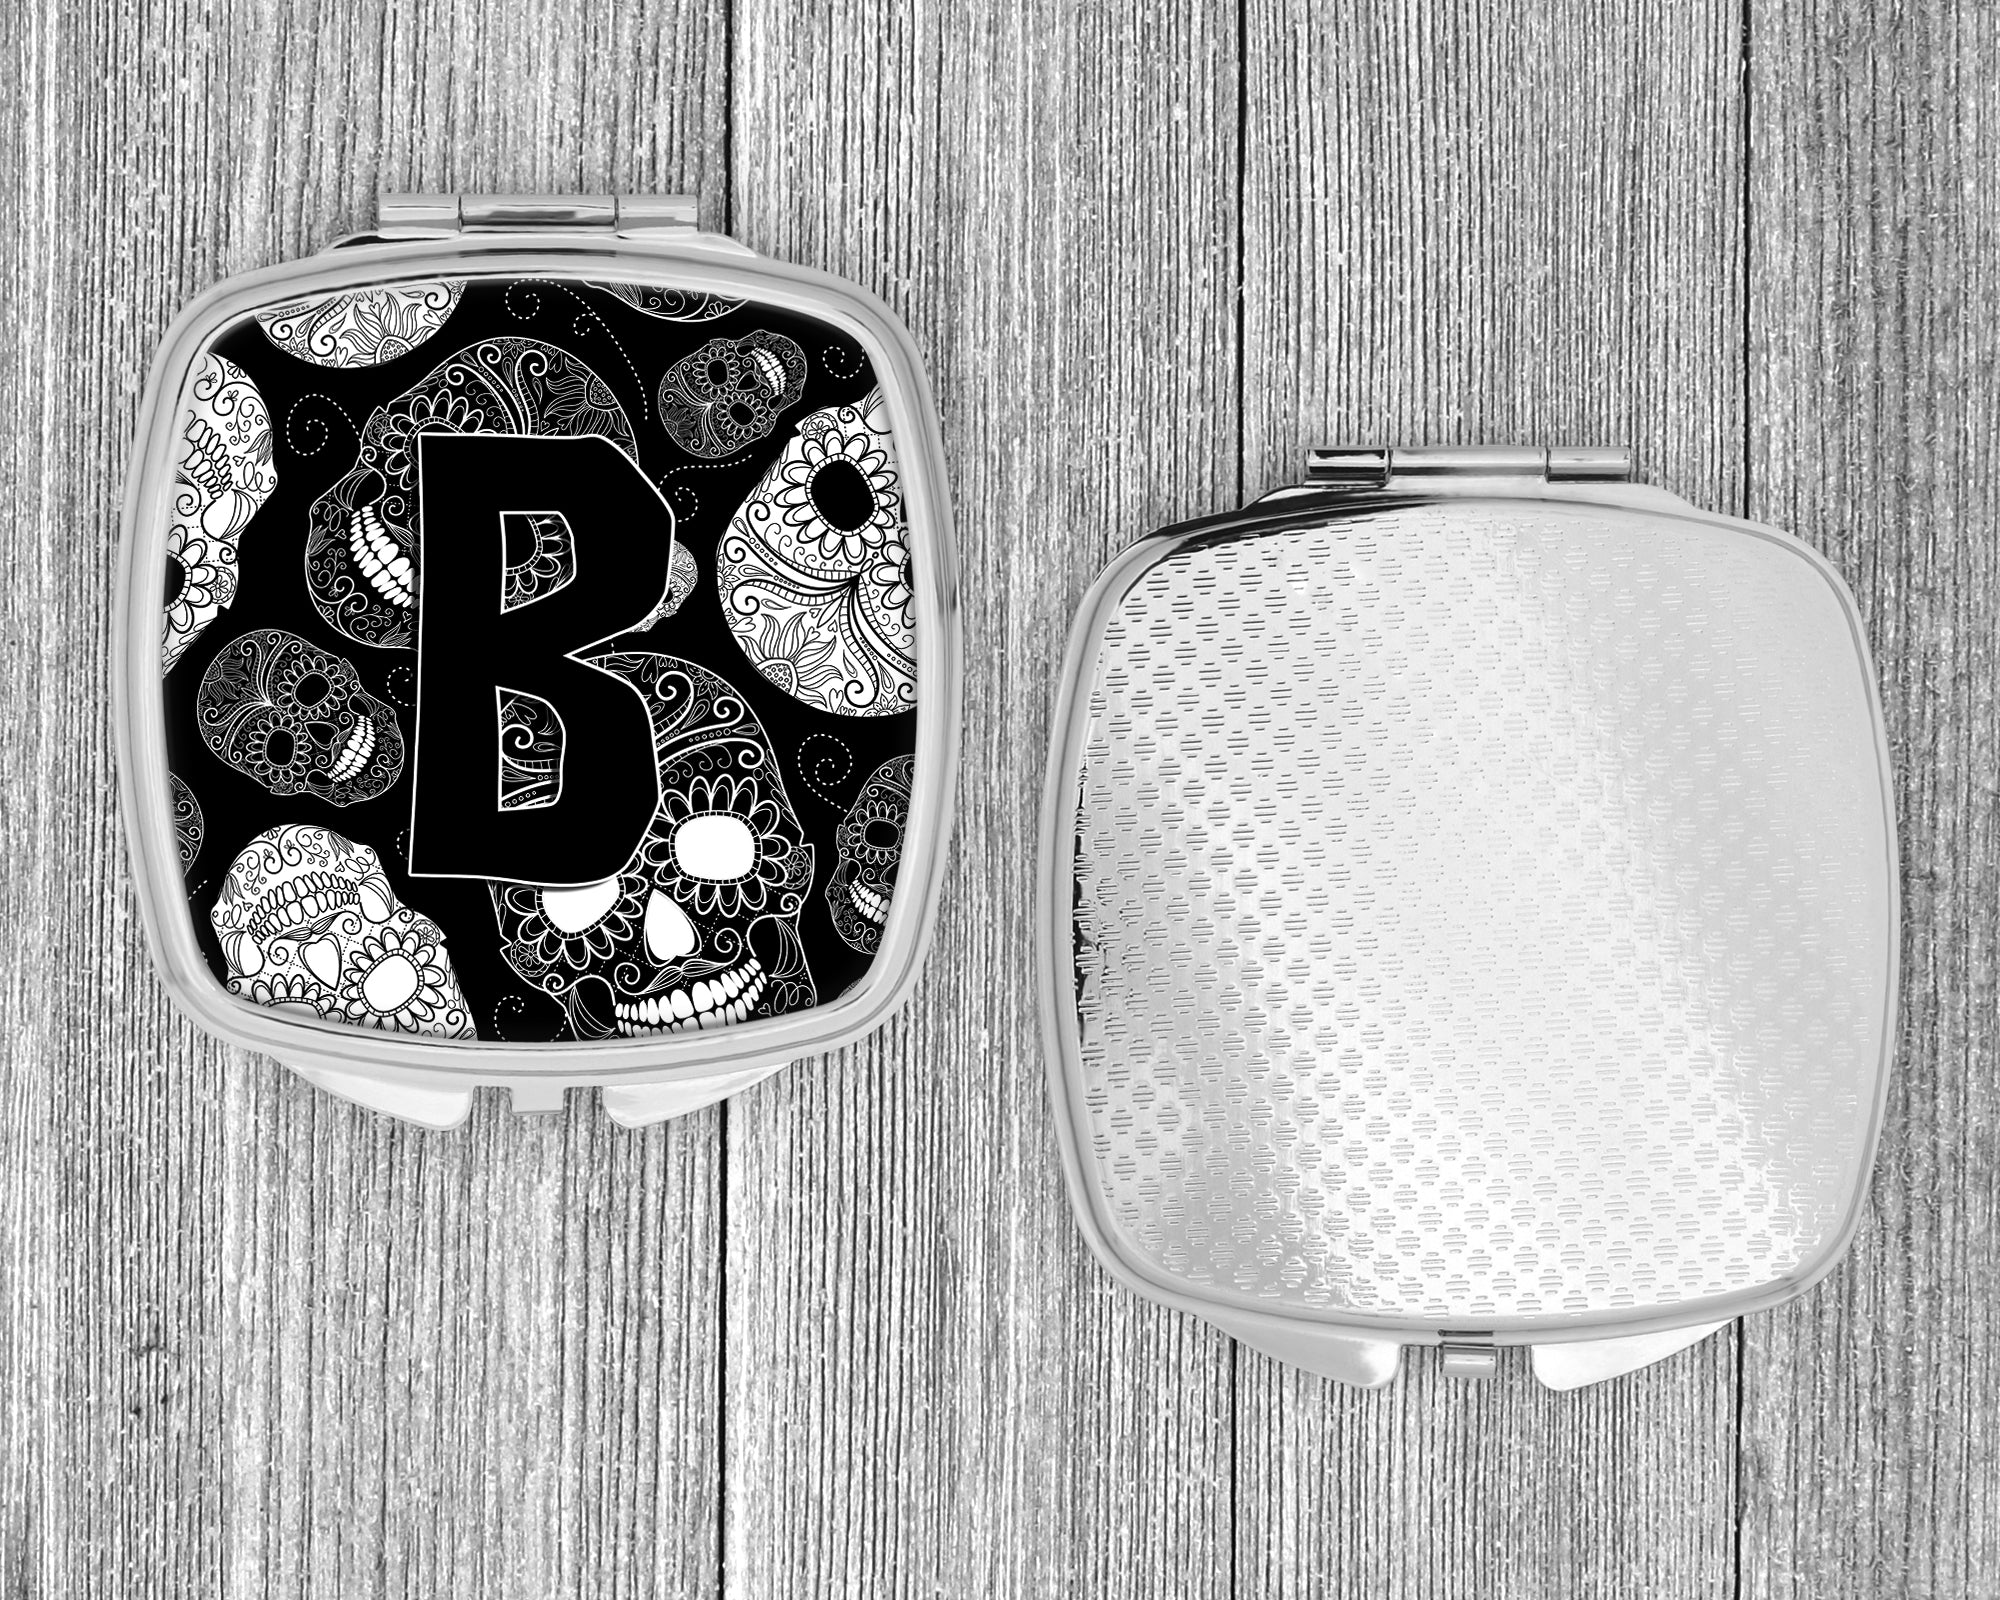 Letter B Day of the Dead Skulls Black Compact Mirror CJ2008-BSCM  the-store.com.